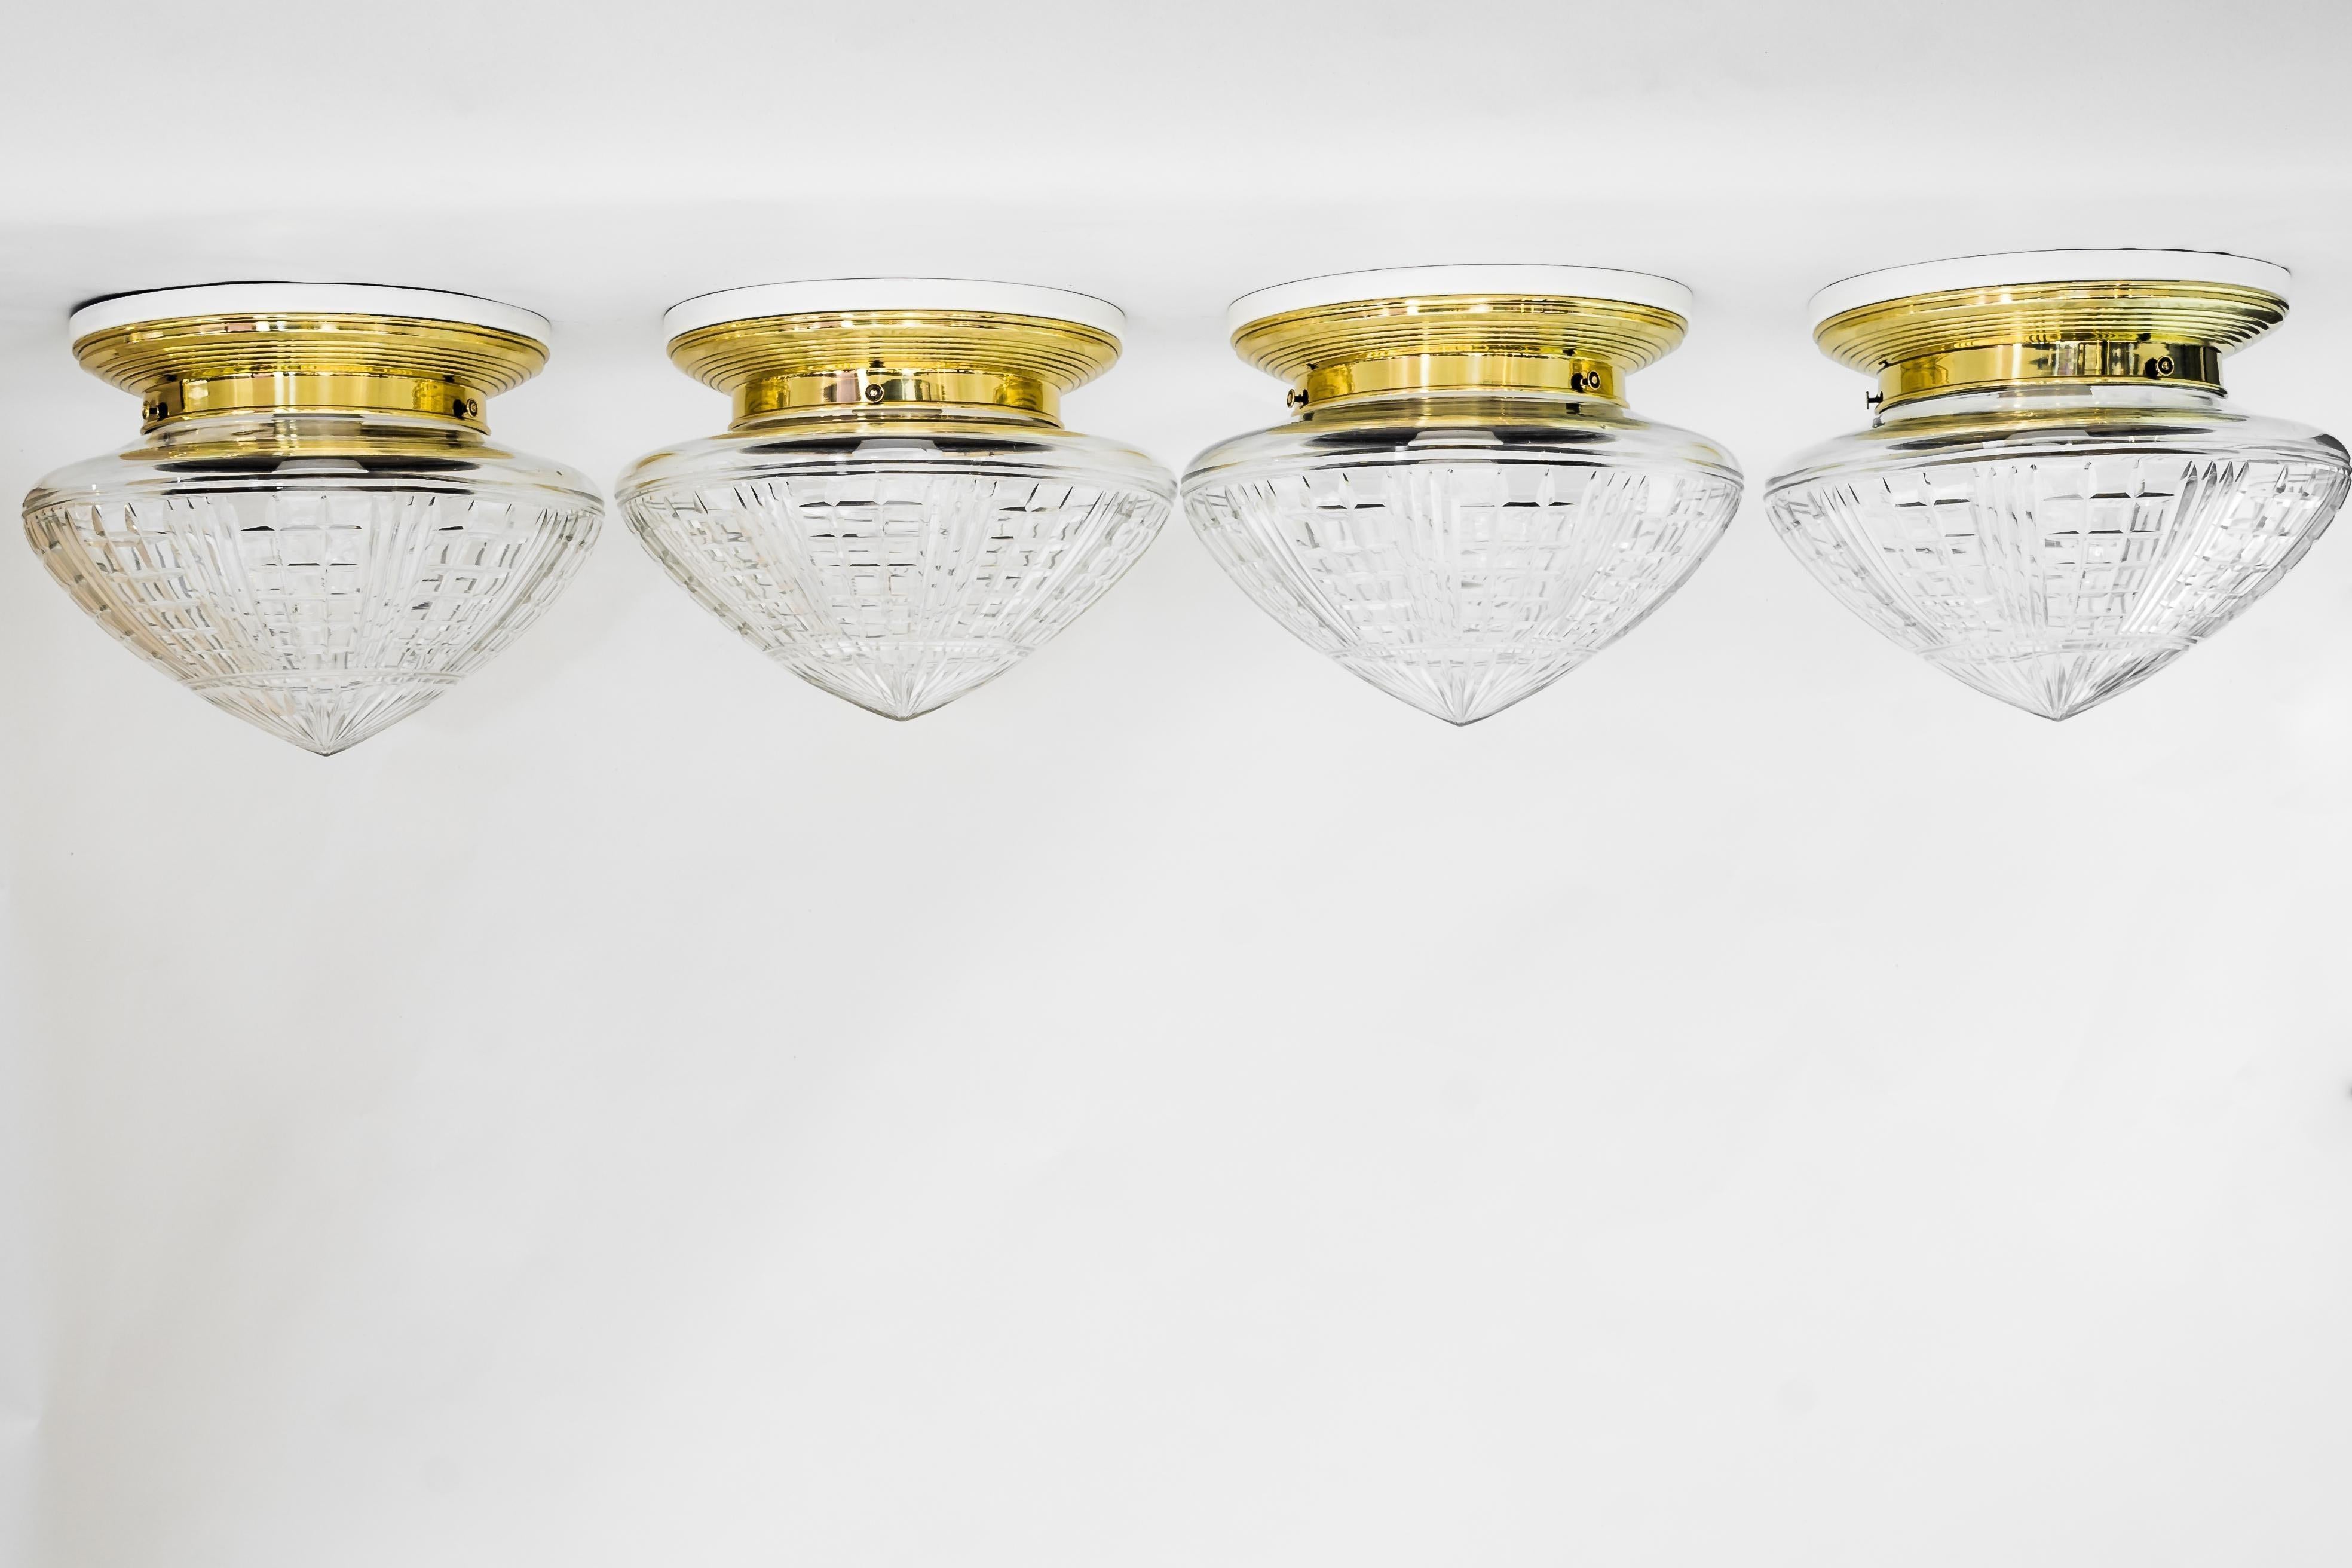 4 Art Deco ceiling lamps, Vienna, around 1920s (price per piece)
Brass polished and stove enameled
Original cut glass
Original wood plates on top white painted).